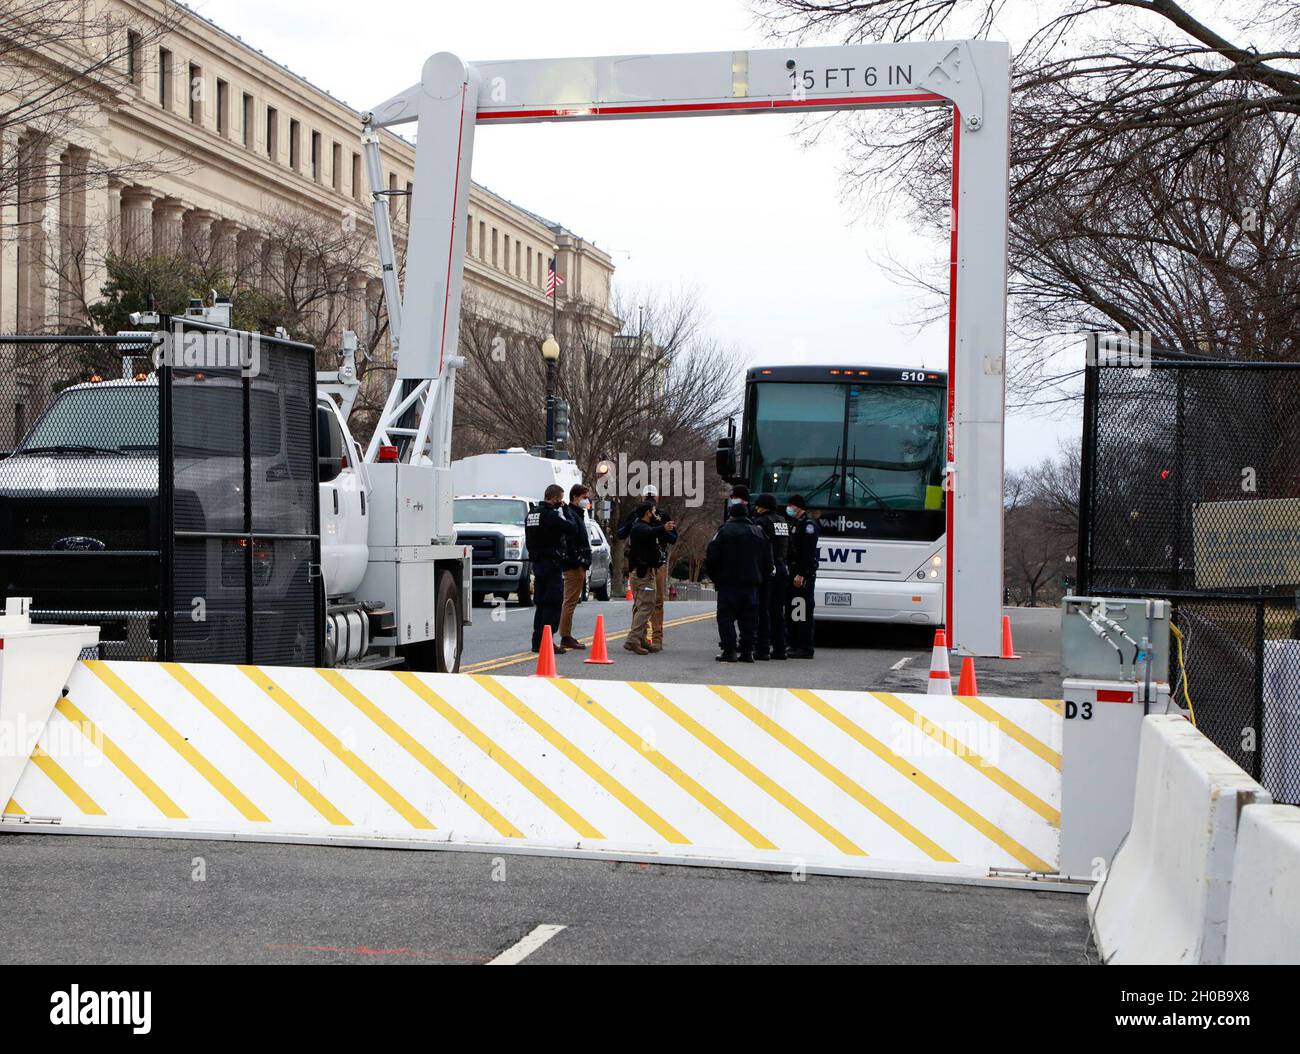 U.S. Customs and Border Protection officers use Non-Intrusive Inspection (NII) technology at entrances to the secure area surrounding the Capitol Building in advance of the 59th Presidential Inauguration.  January 16, 2021. Stock Photo